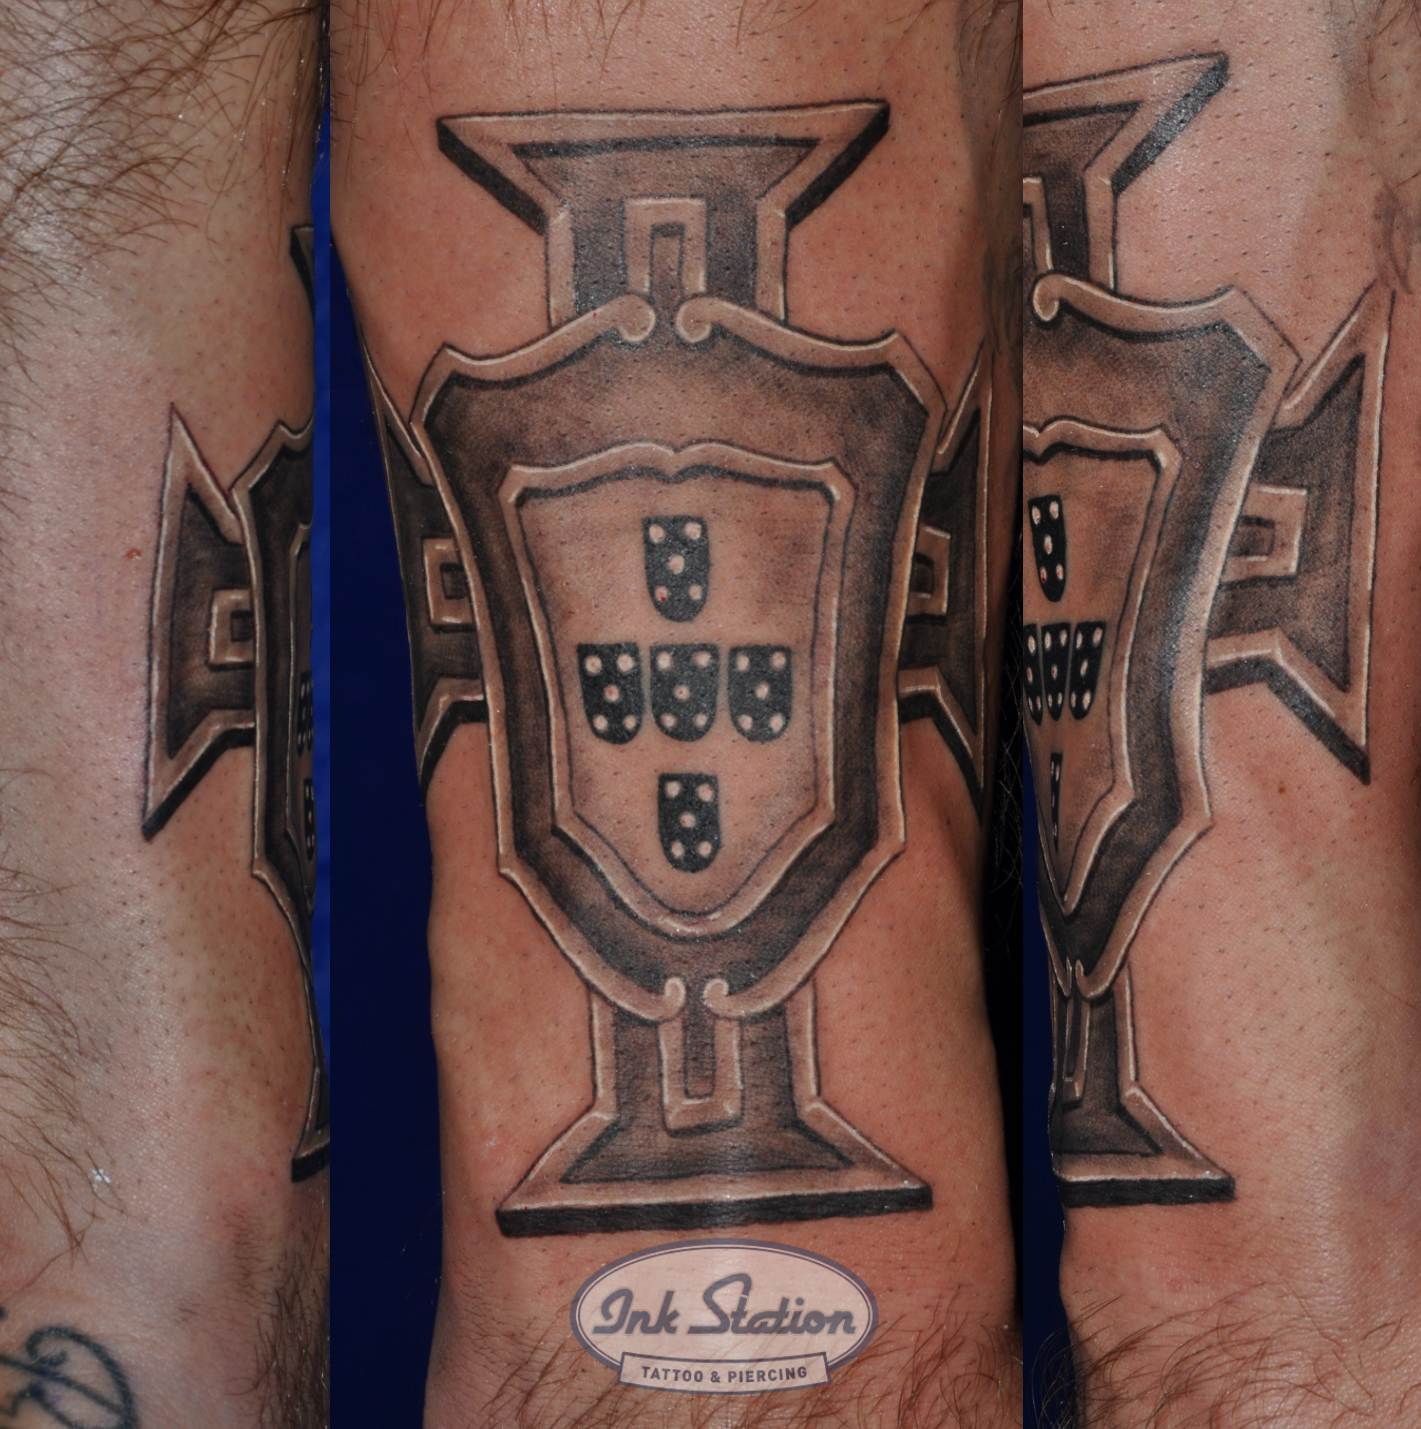 Portugal Fussball Wappen Football Coat Of Arms Tattoo Black And Grey inside measurements 1421 X 1429